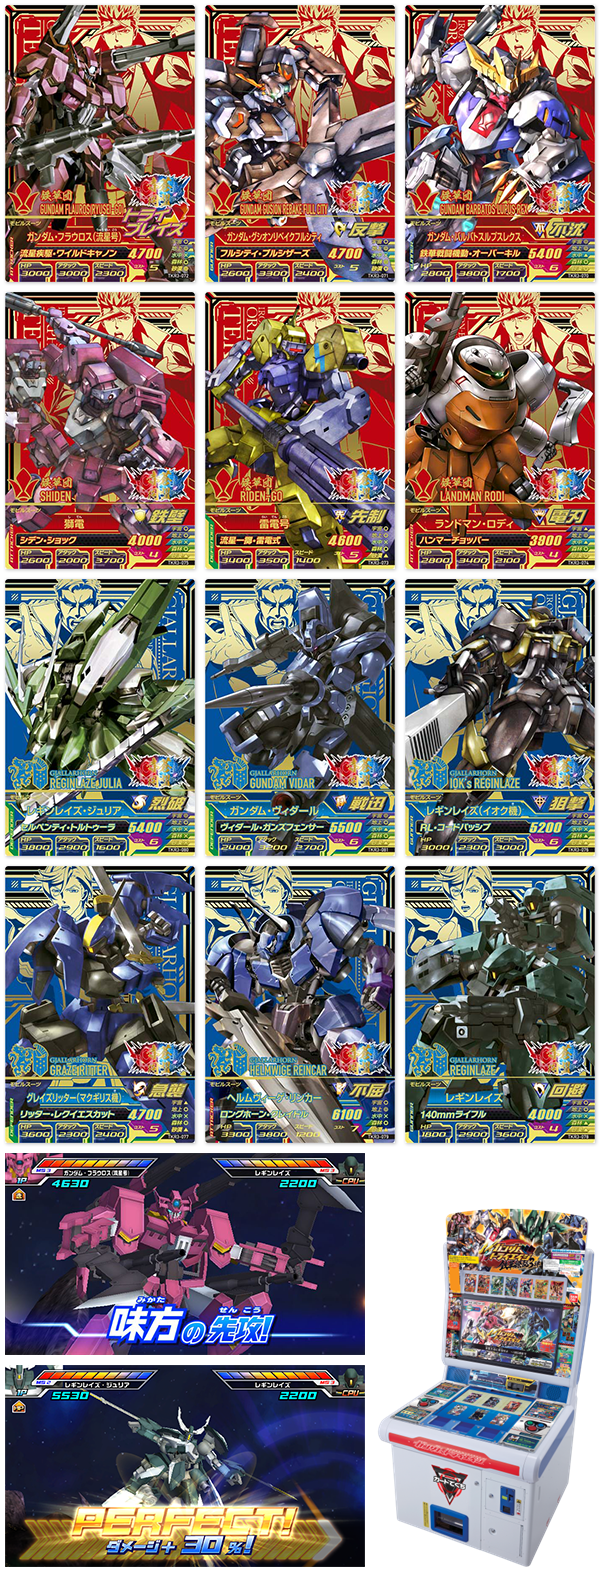 Products Game 機動戦士ガンダム 鉄血のオルフェンズ